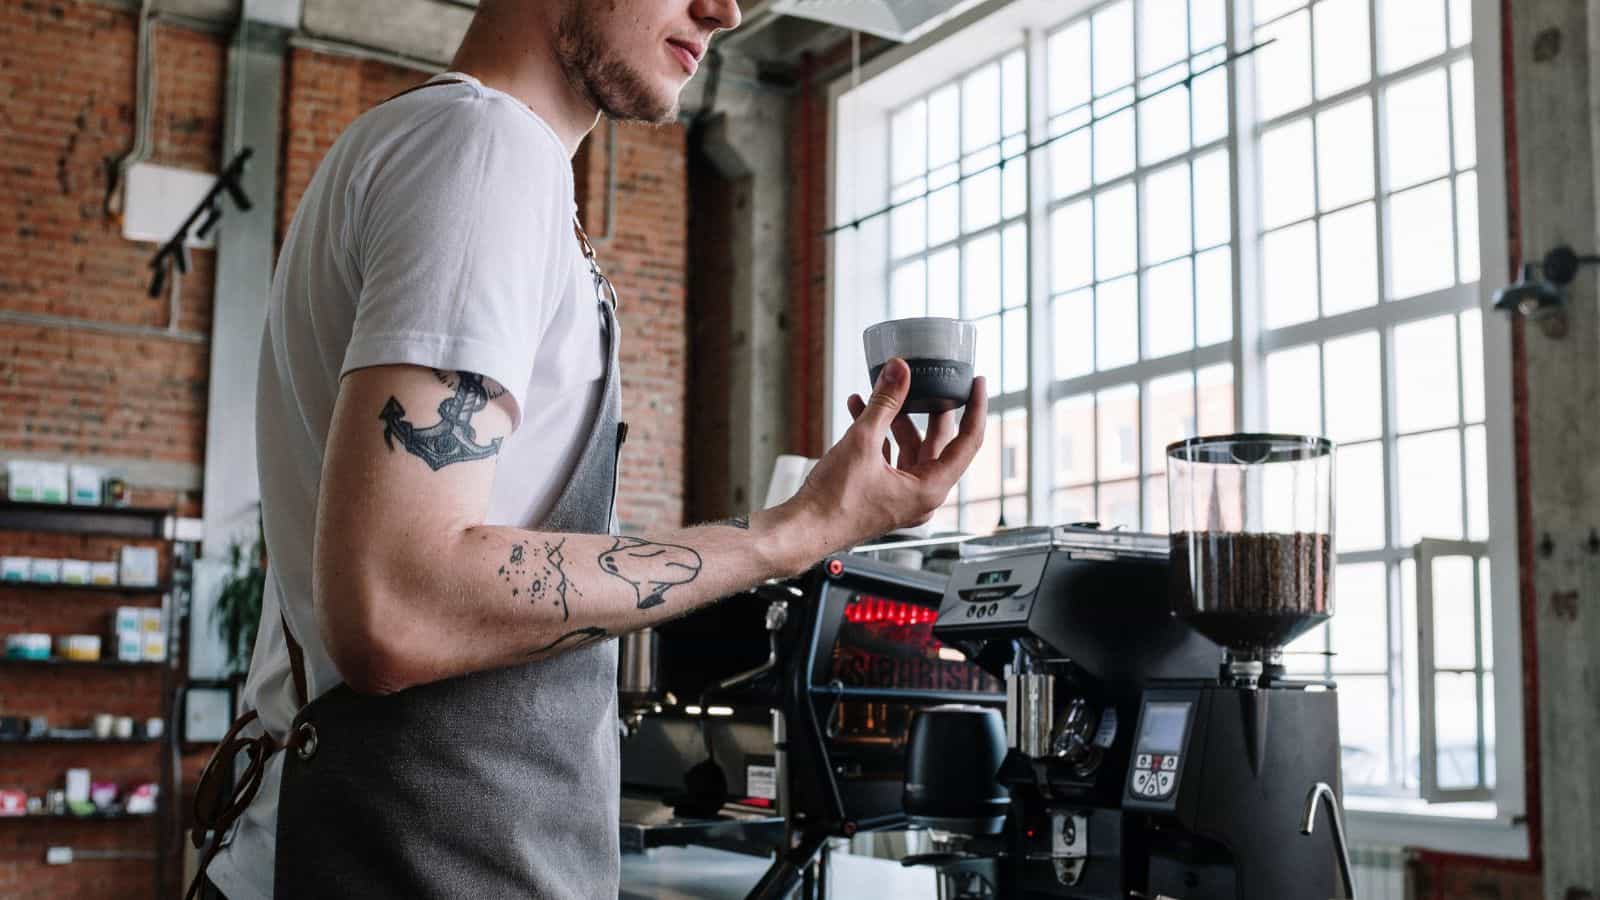 Barista holding an espresso cup in front of a coffee maker